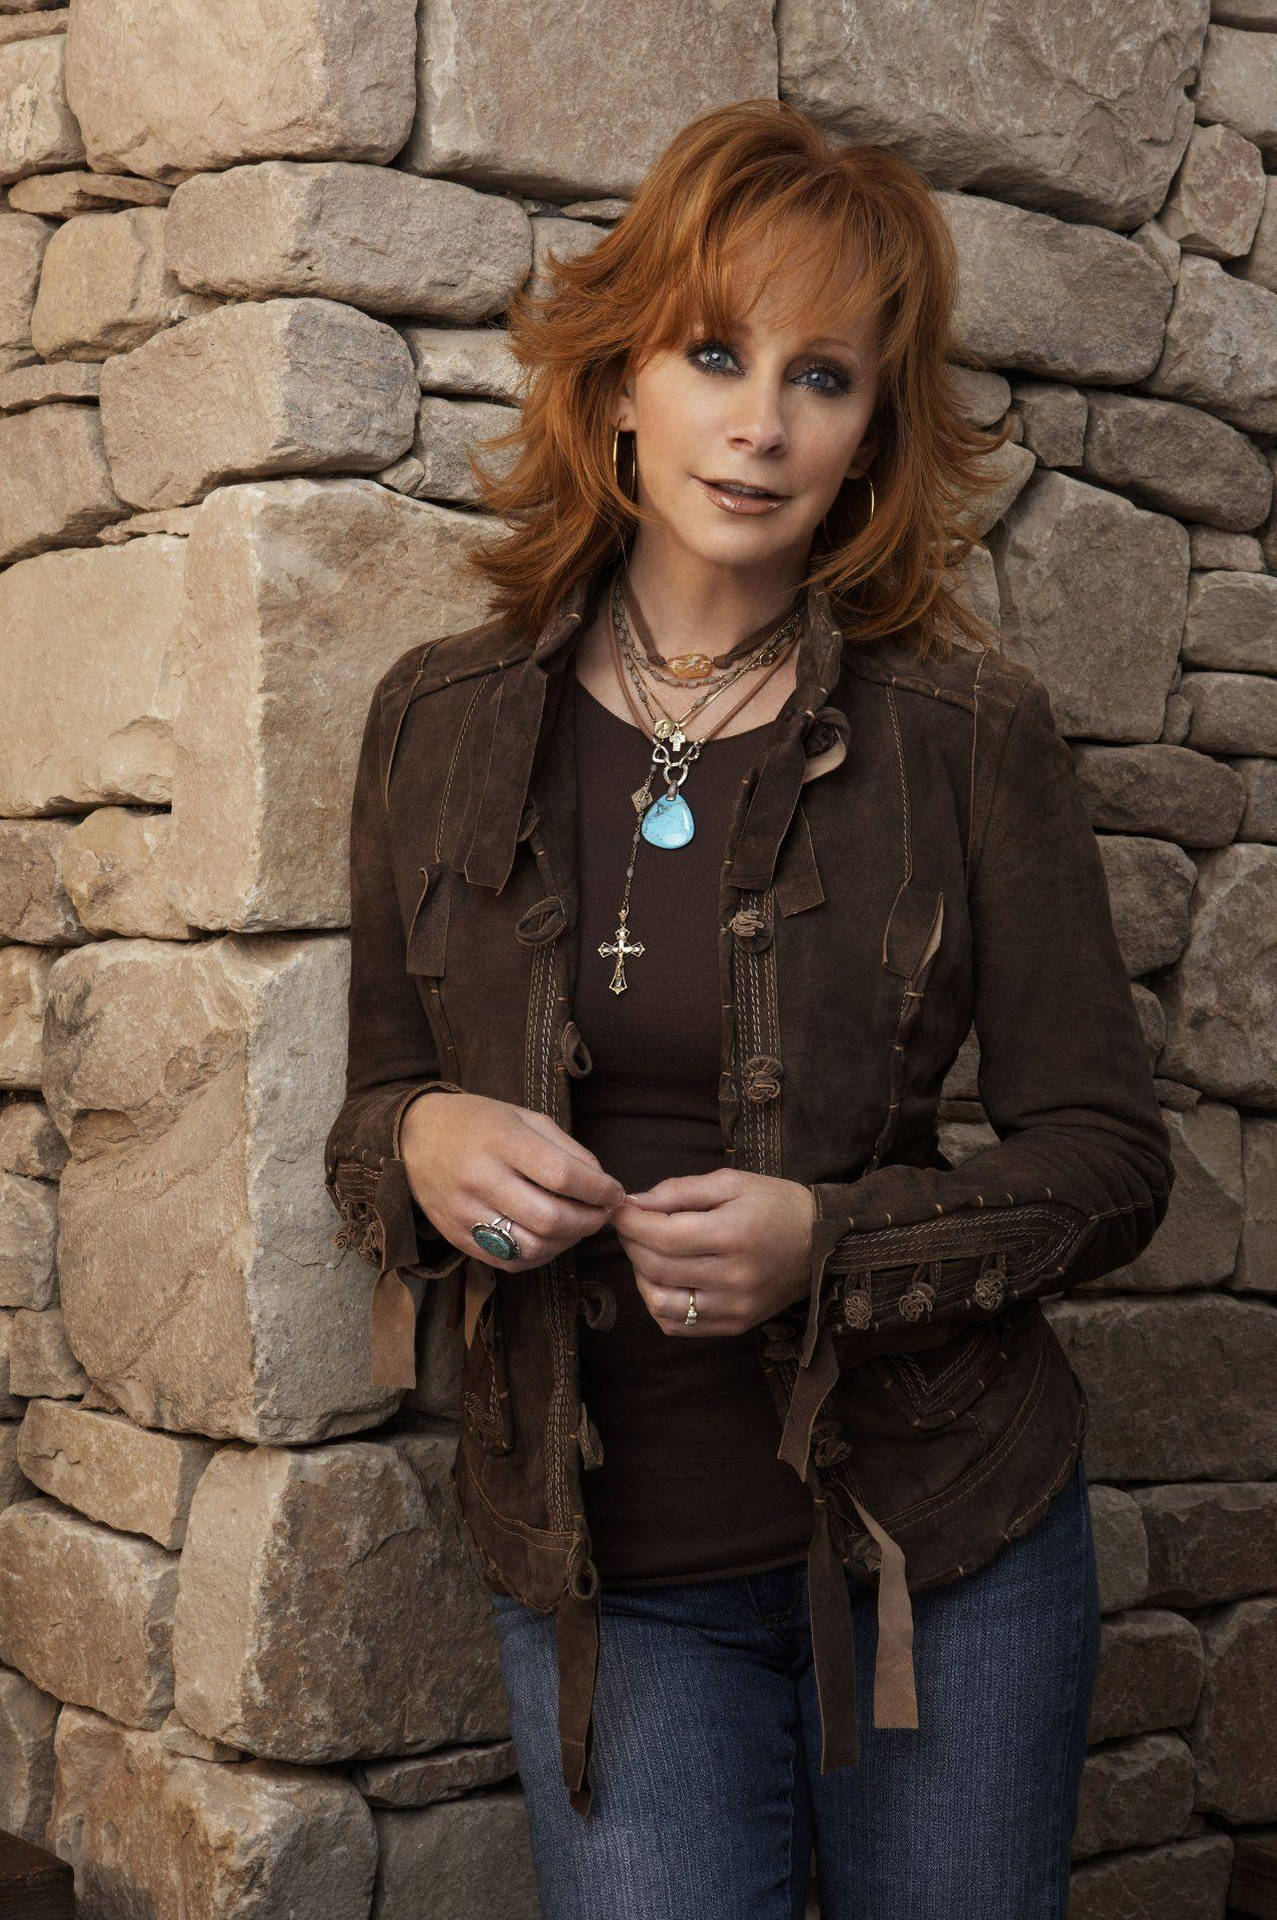 Reba McEntire - The Vintage Queen of Country Music. Wallpaper